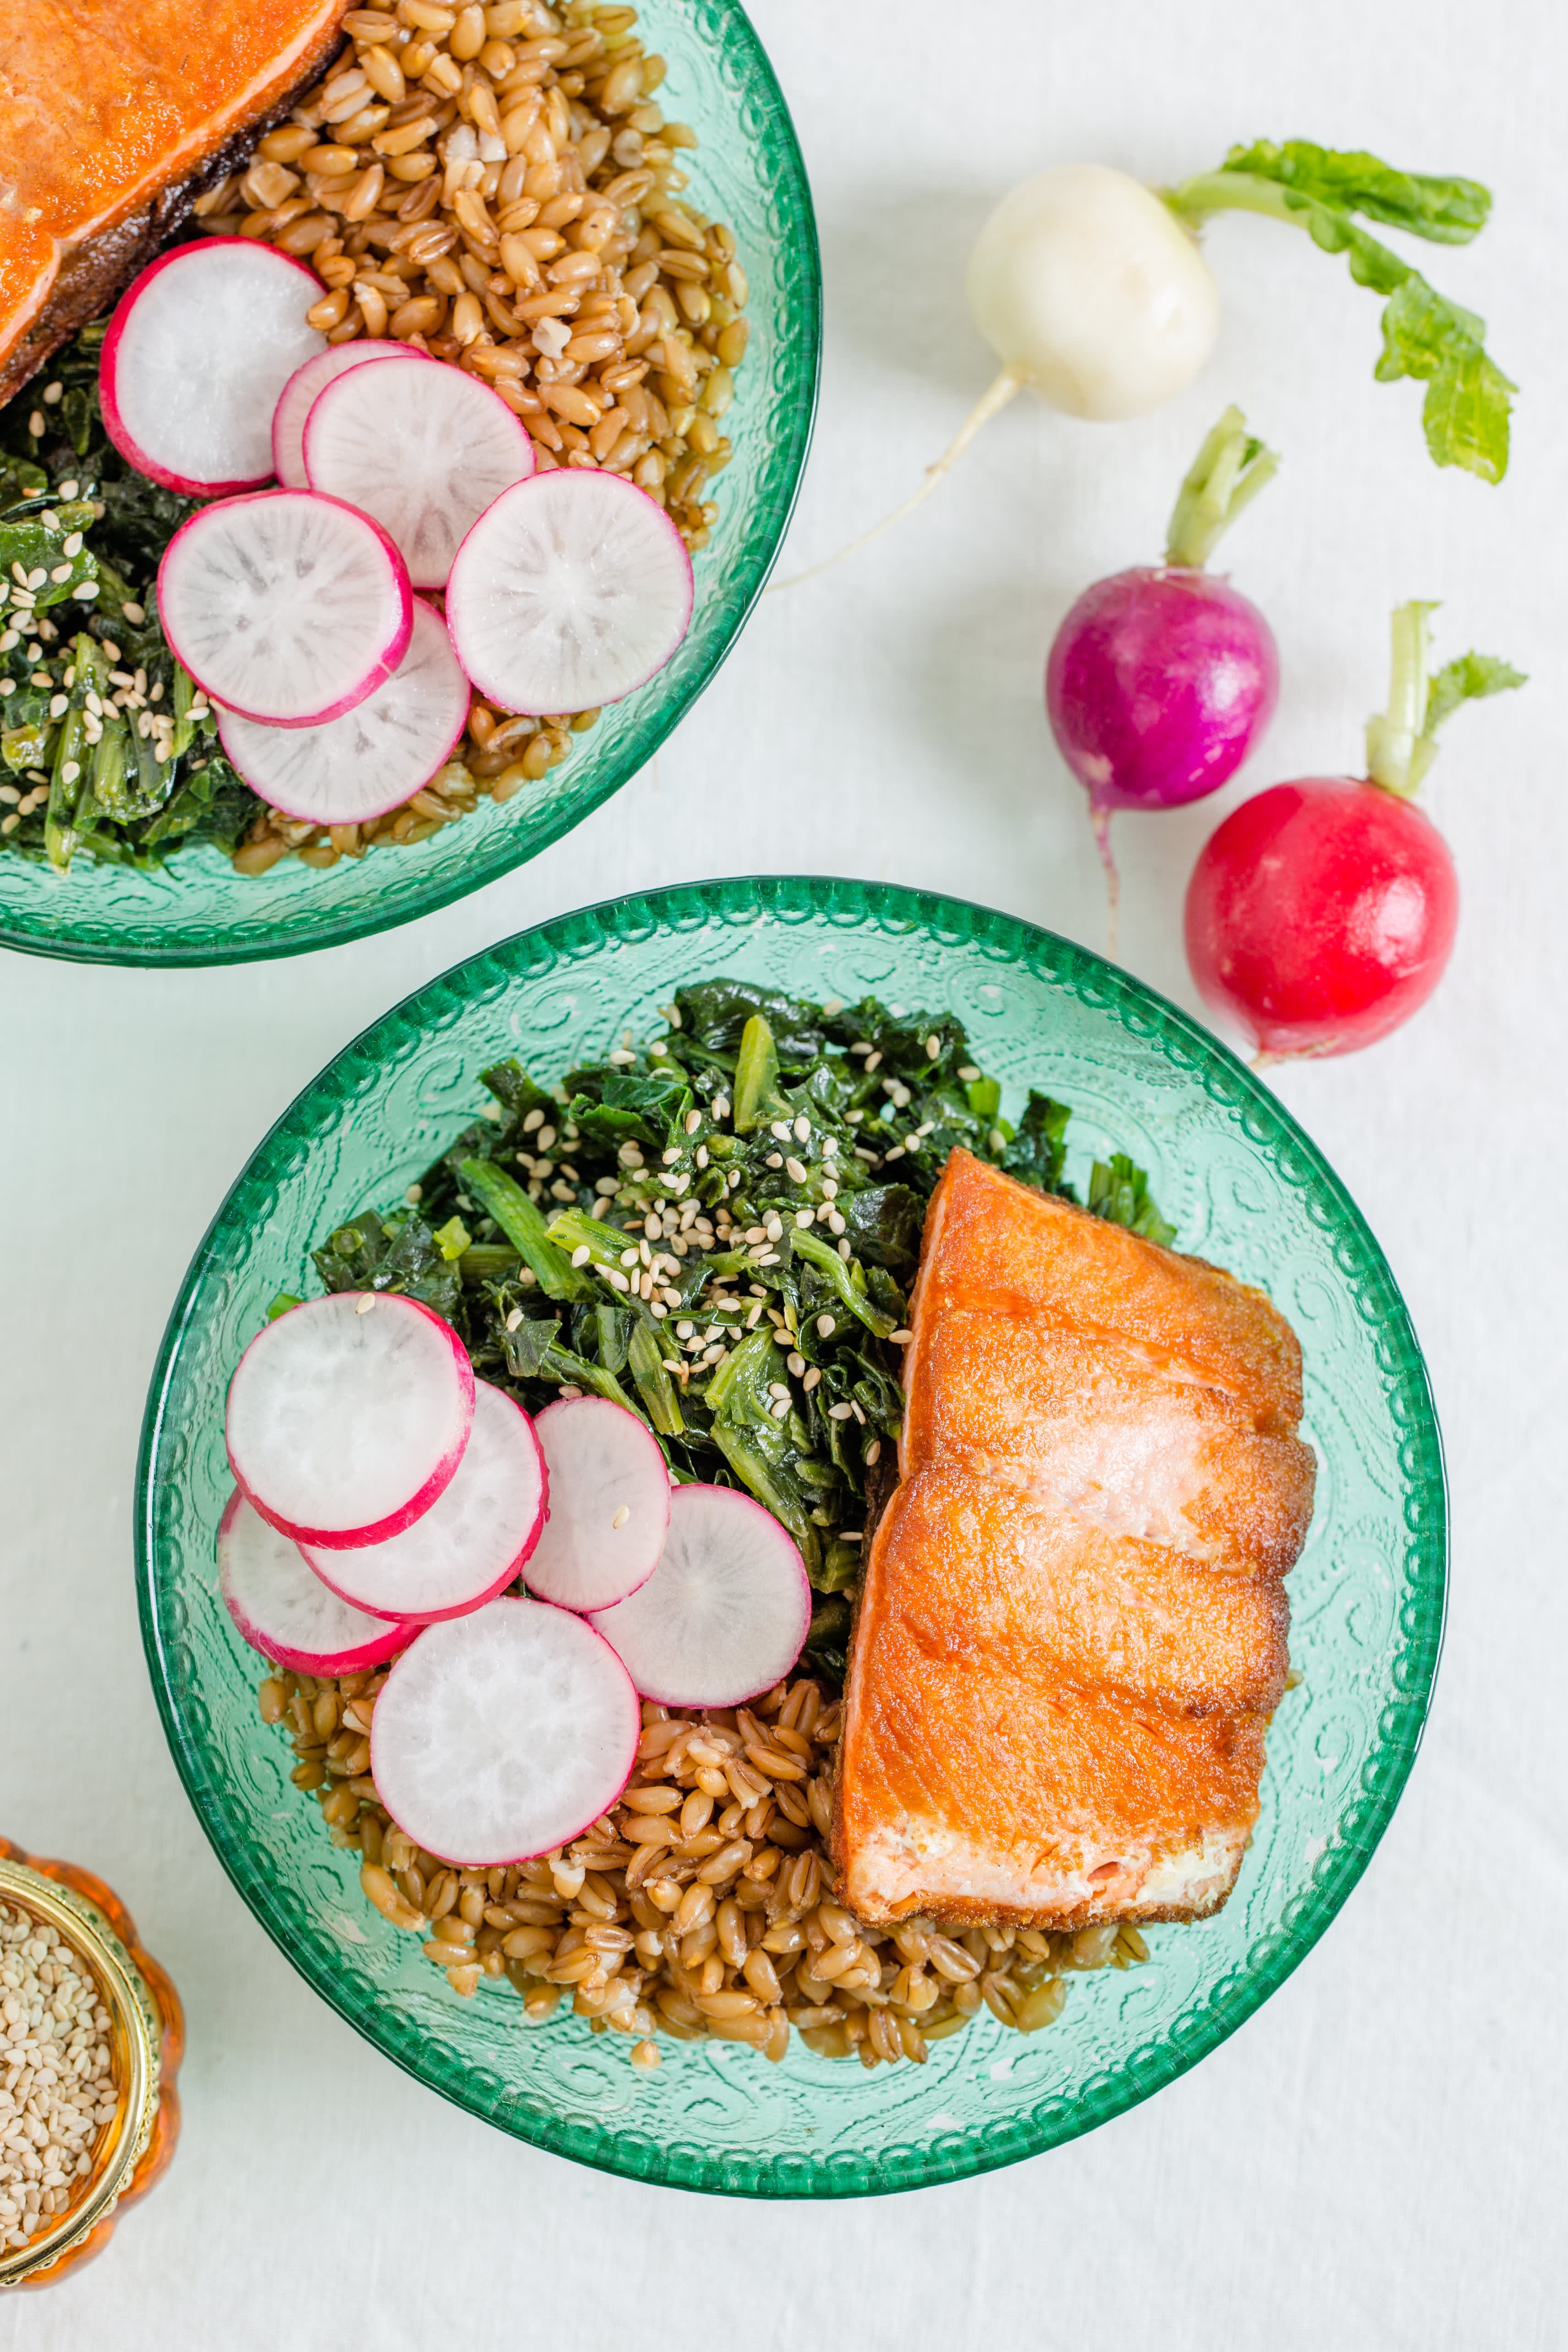 3 Packable Lunch Bowls to Prevent the 4 O'Clock Slump